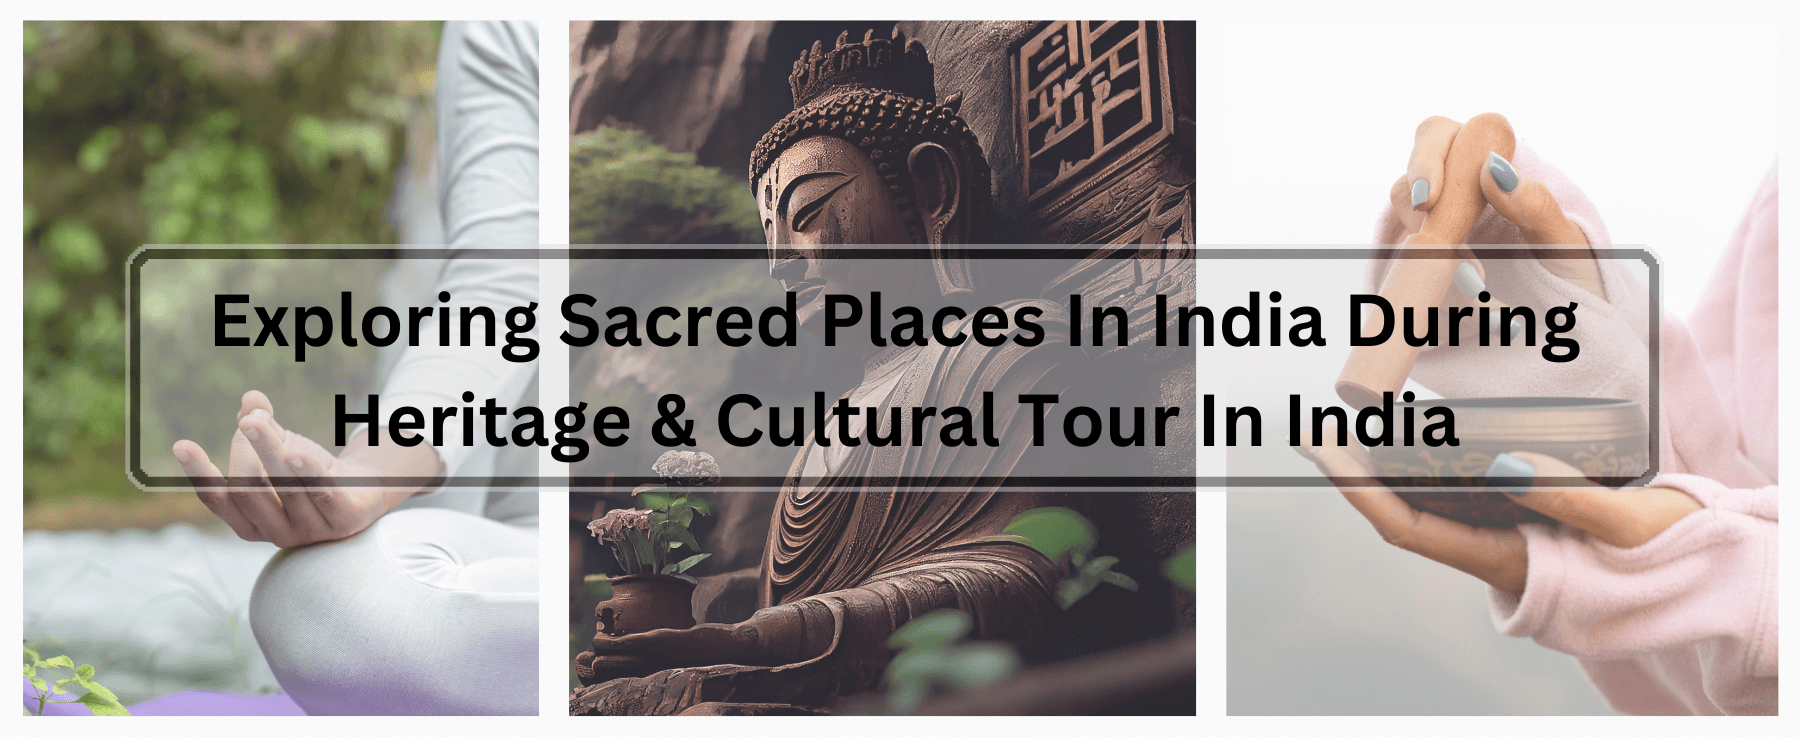 Exploring Sacred Places In India During Heritage & Cultural Tour In India